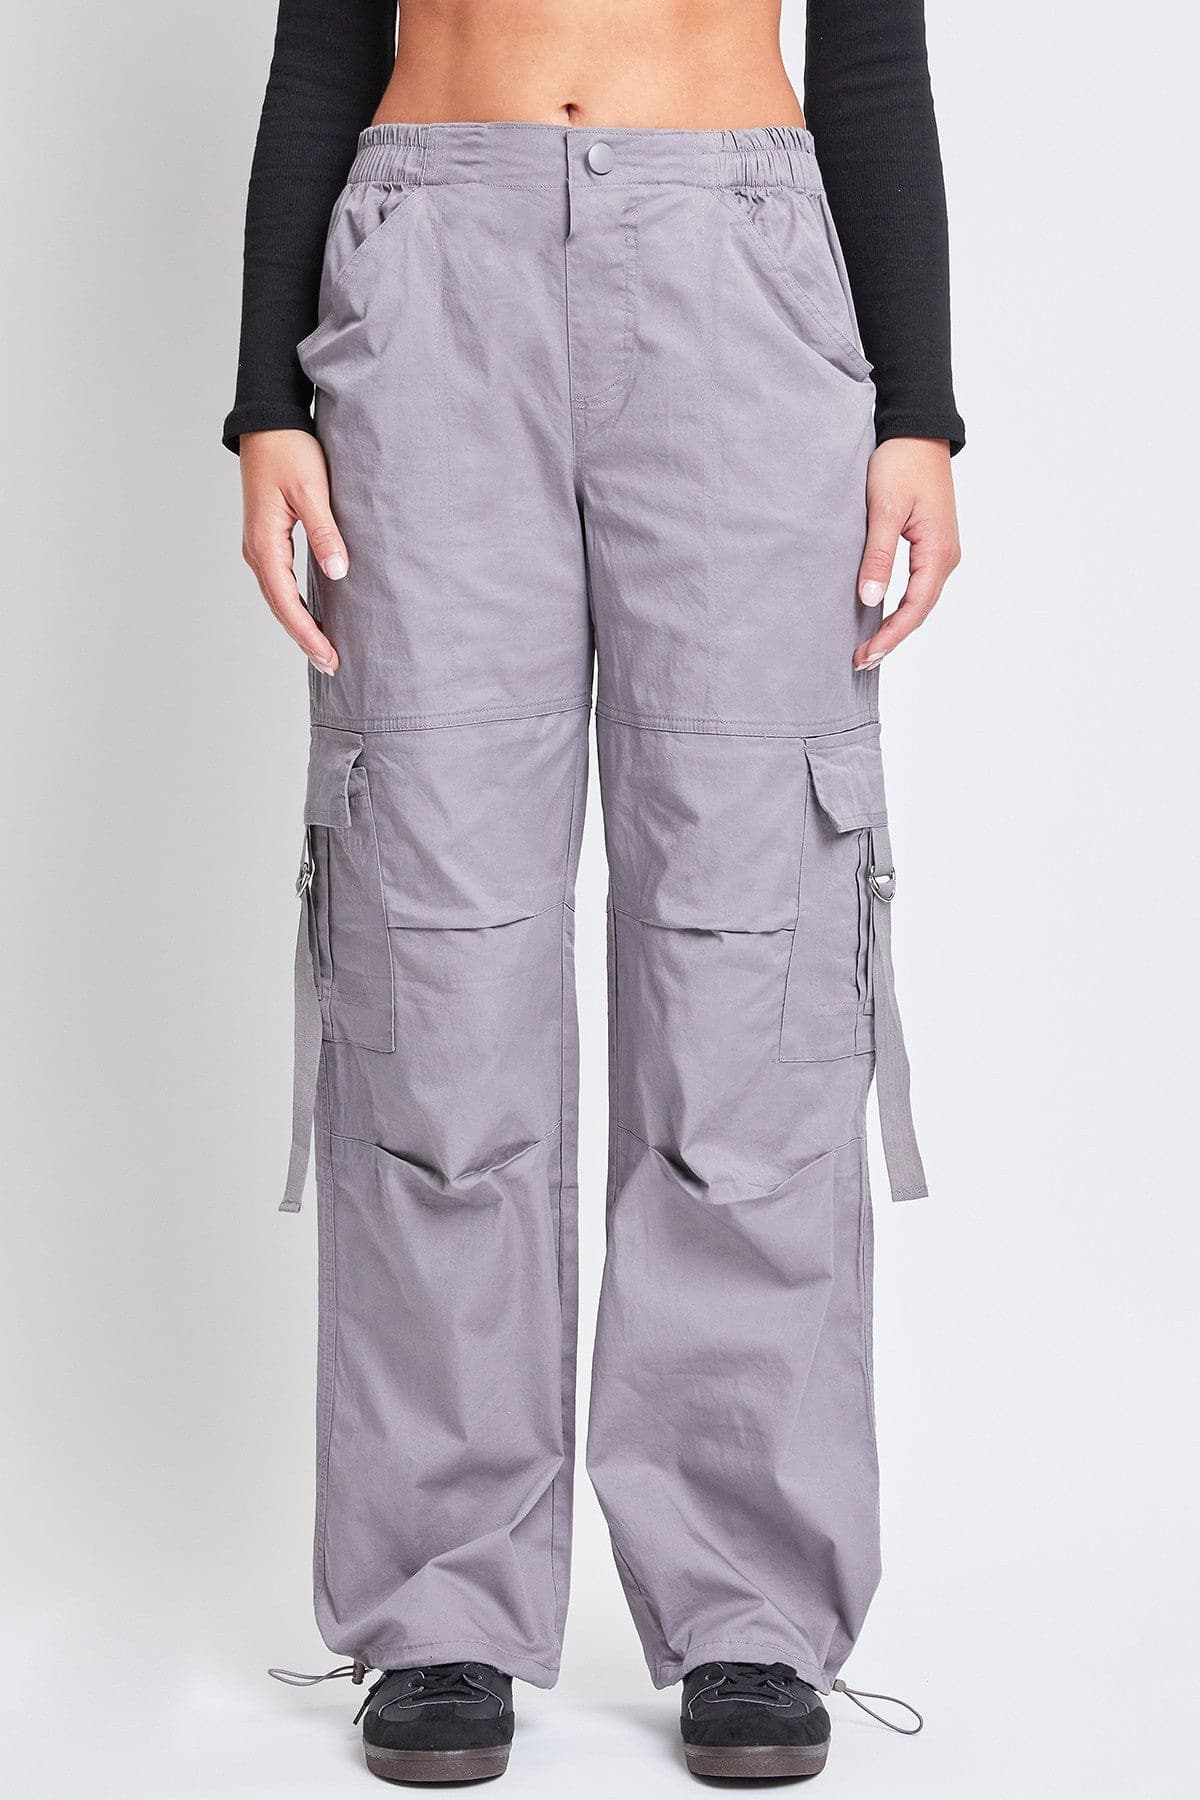 Women’s Relaxed Fit Ring Cargo Pants